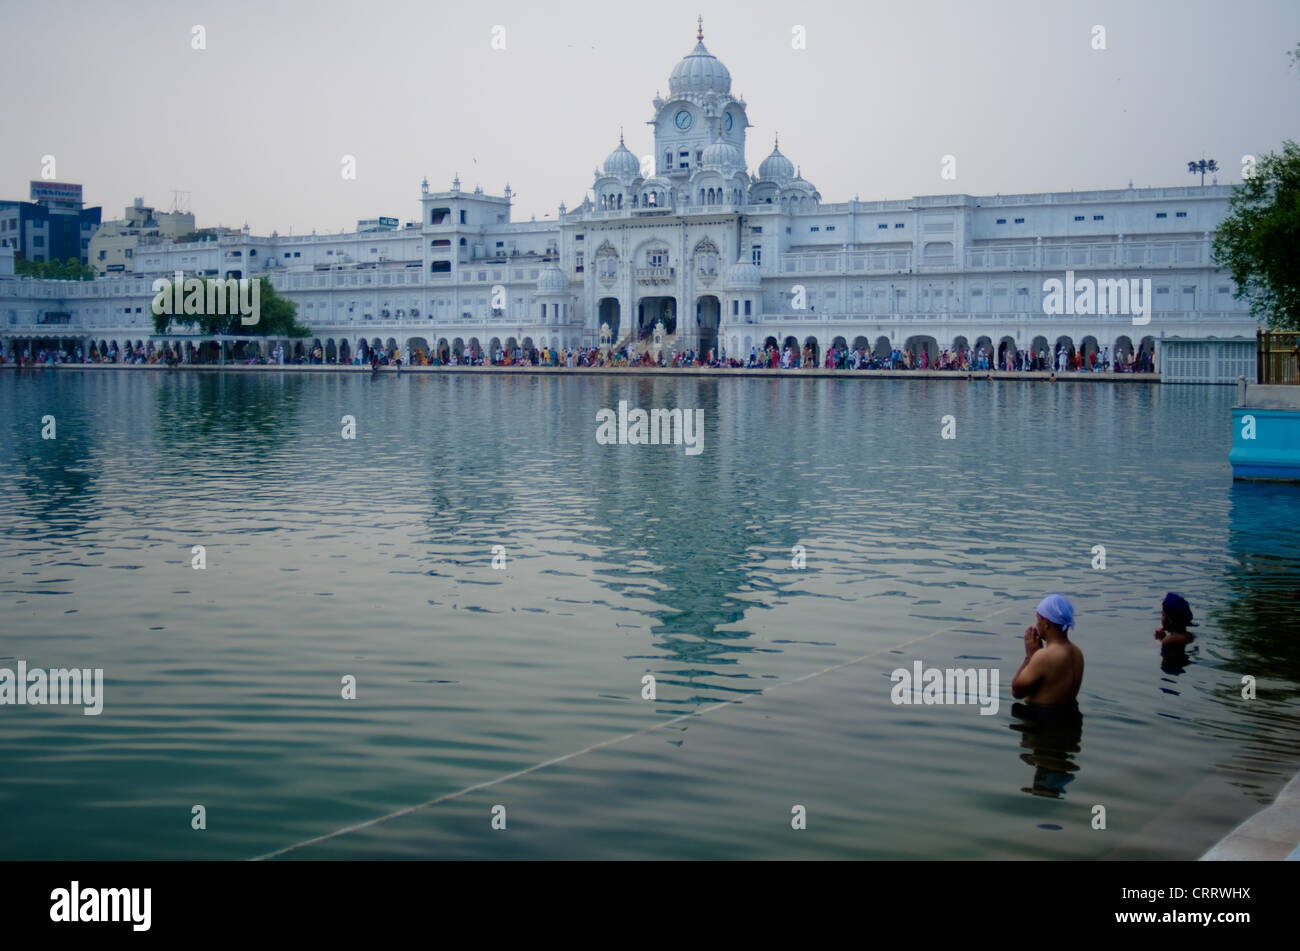 Men bath in the central pool at the Golden Temple, the Sikhs holiest place, in Amritsar, India. Stock Photo